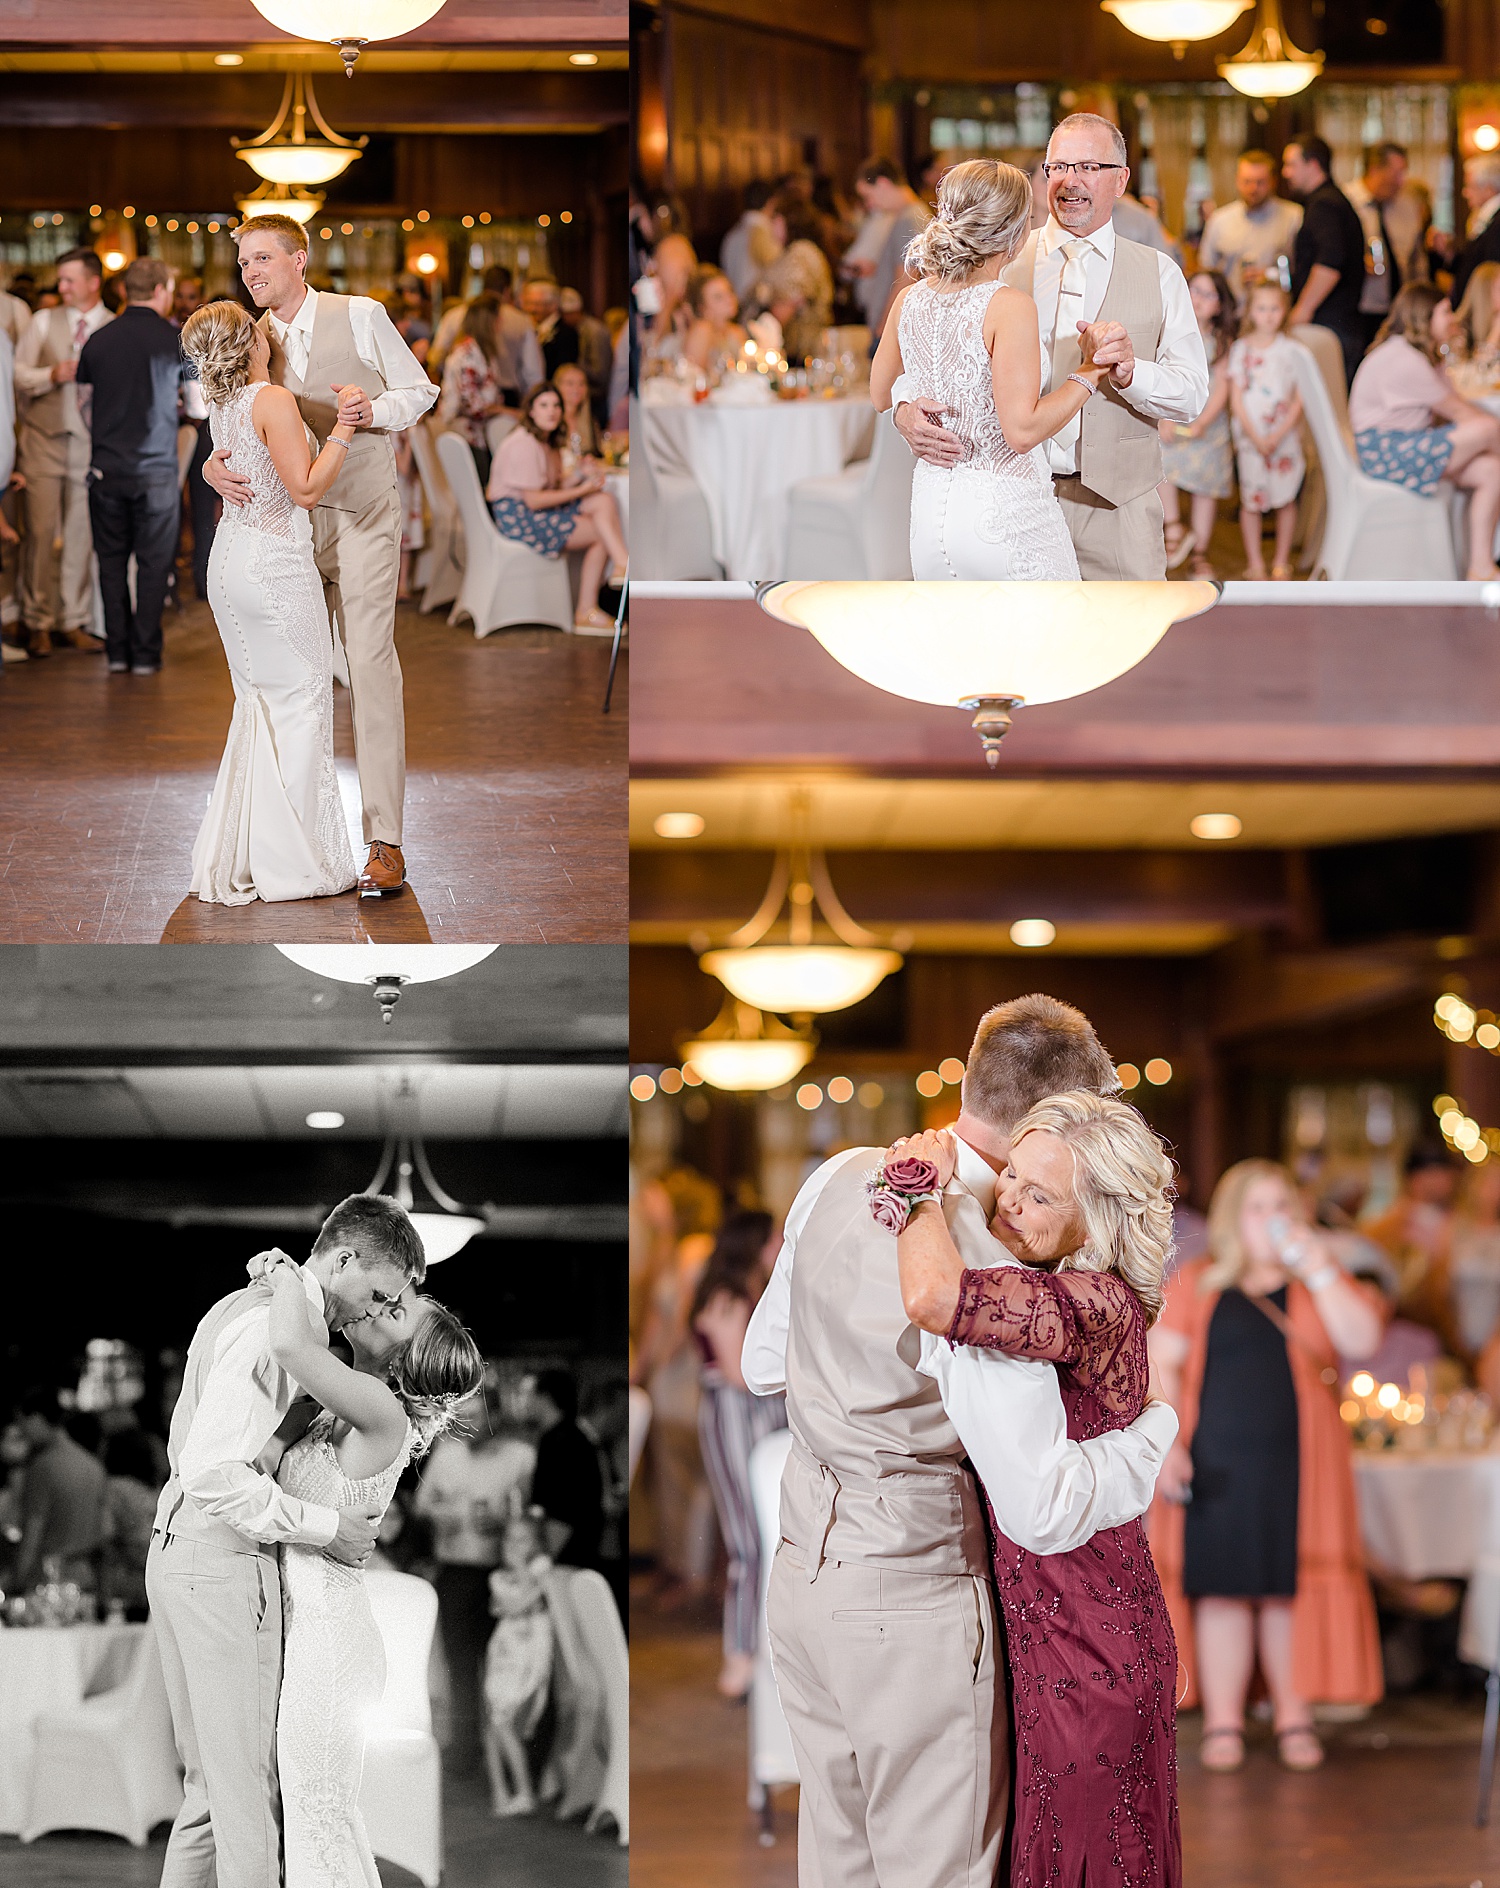 first special dances with parents of bride and groom at wedding reception by Midwest photographer fernweh & Liebe